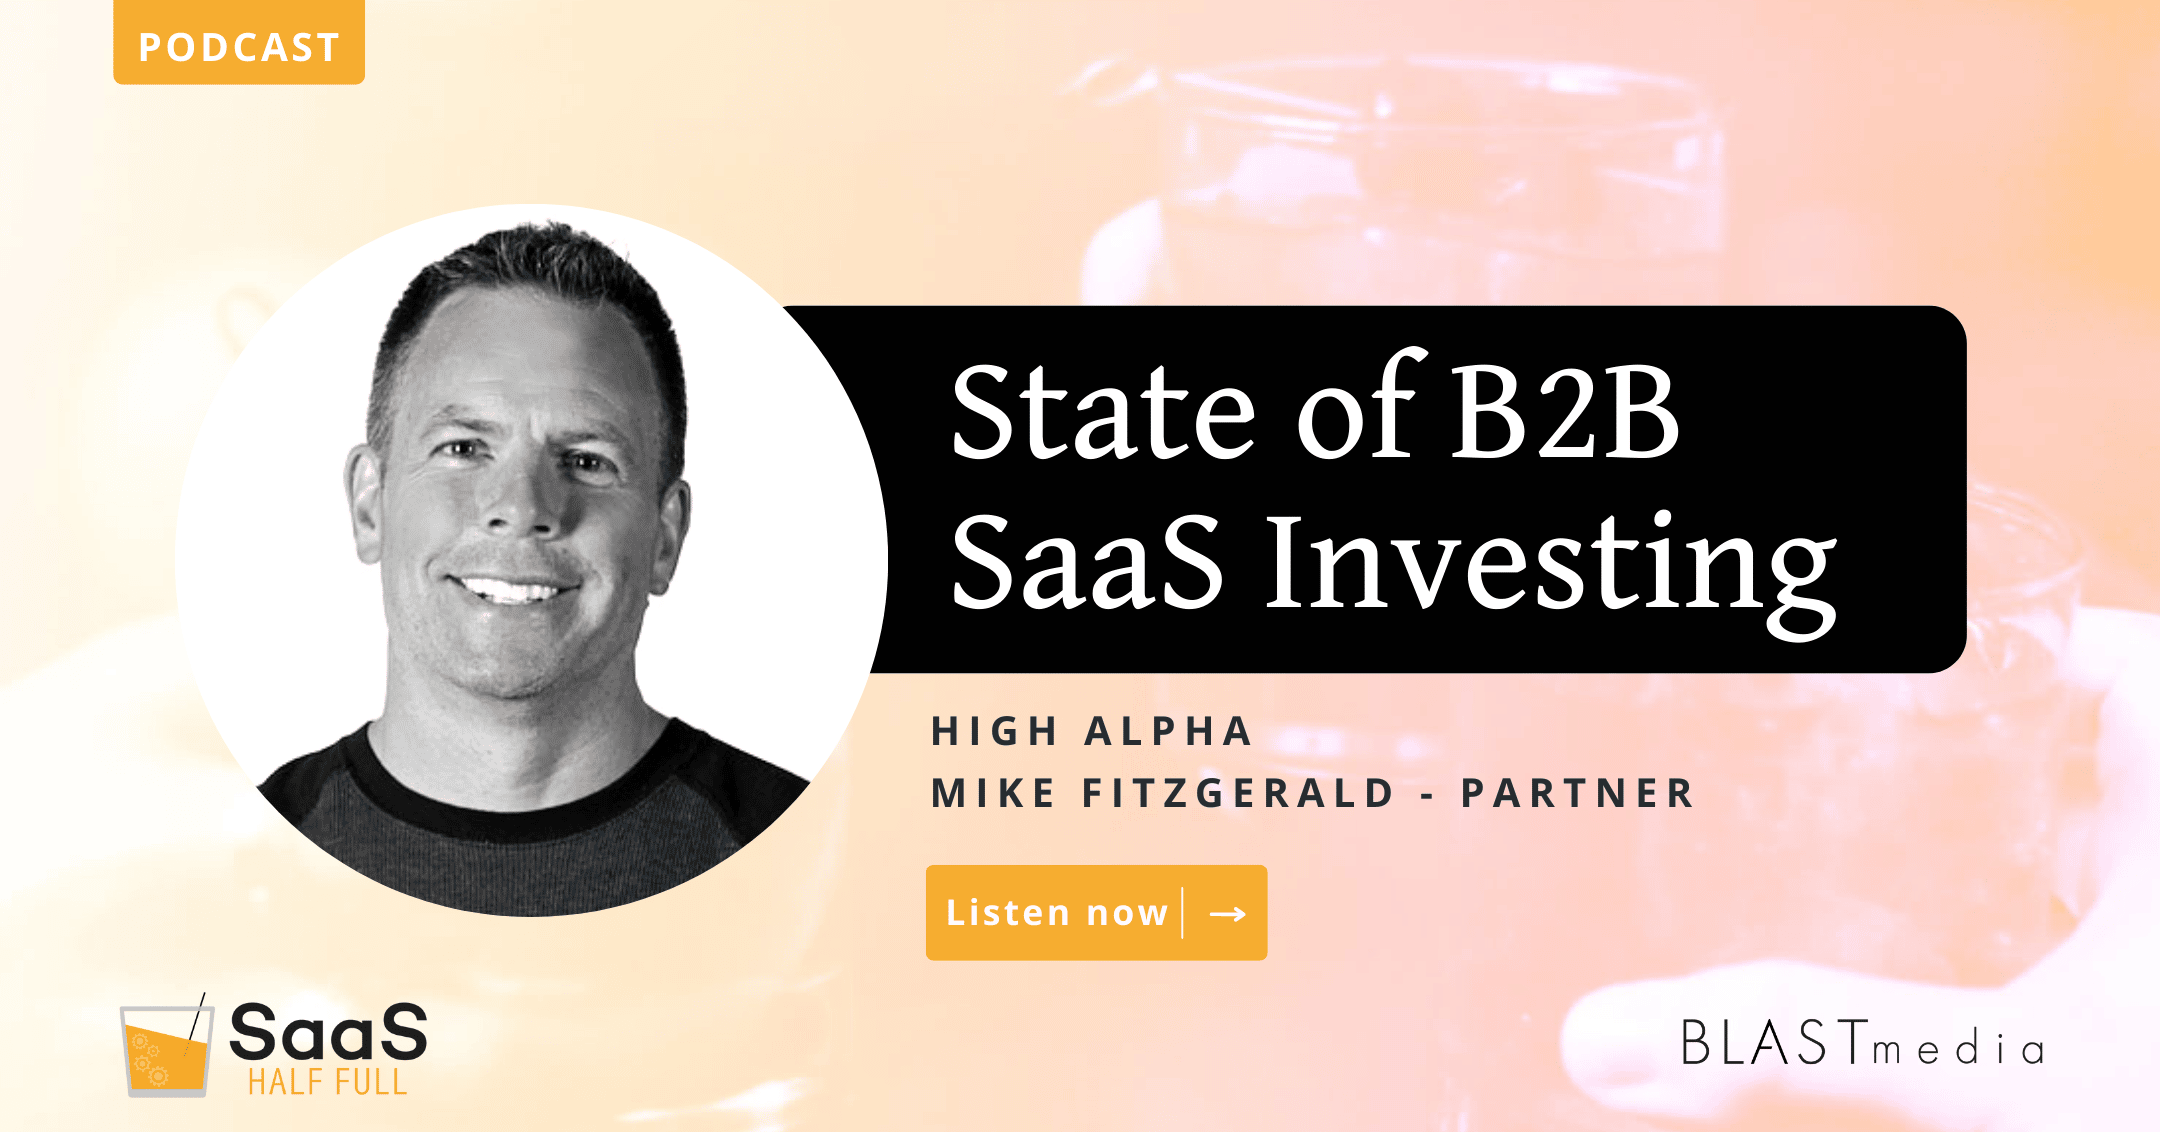 State of B2B SaaS Investing with Mike Fitzgerald, High Alpha